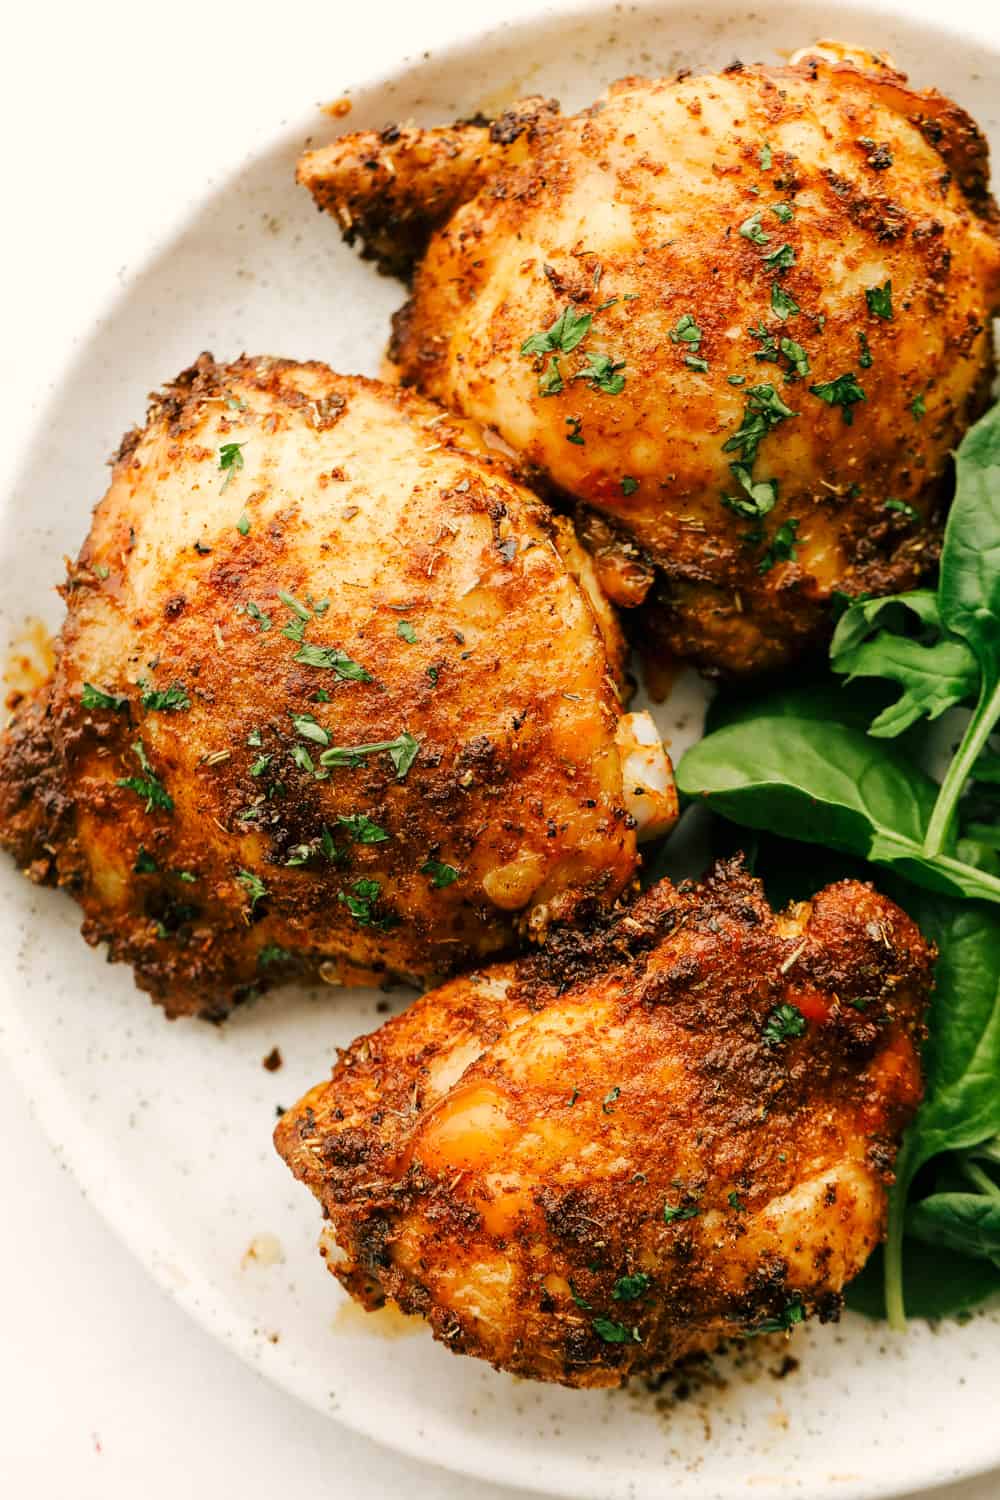 BEST MEXICAN CHICKEN THIGH RECIPES